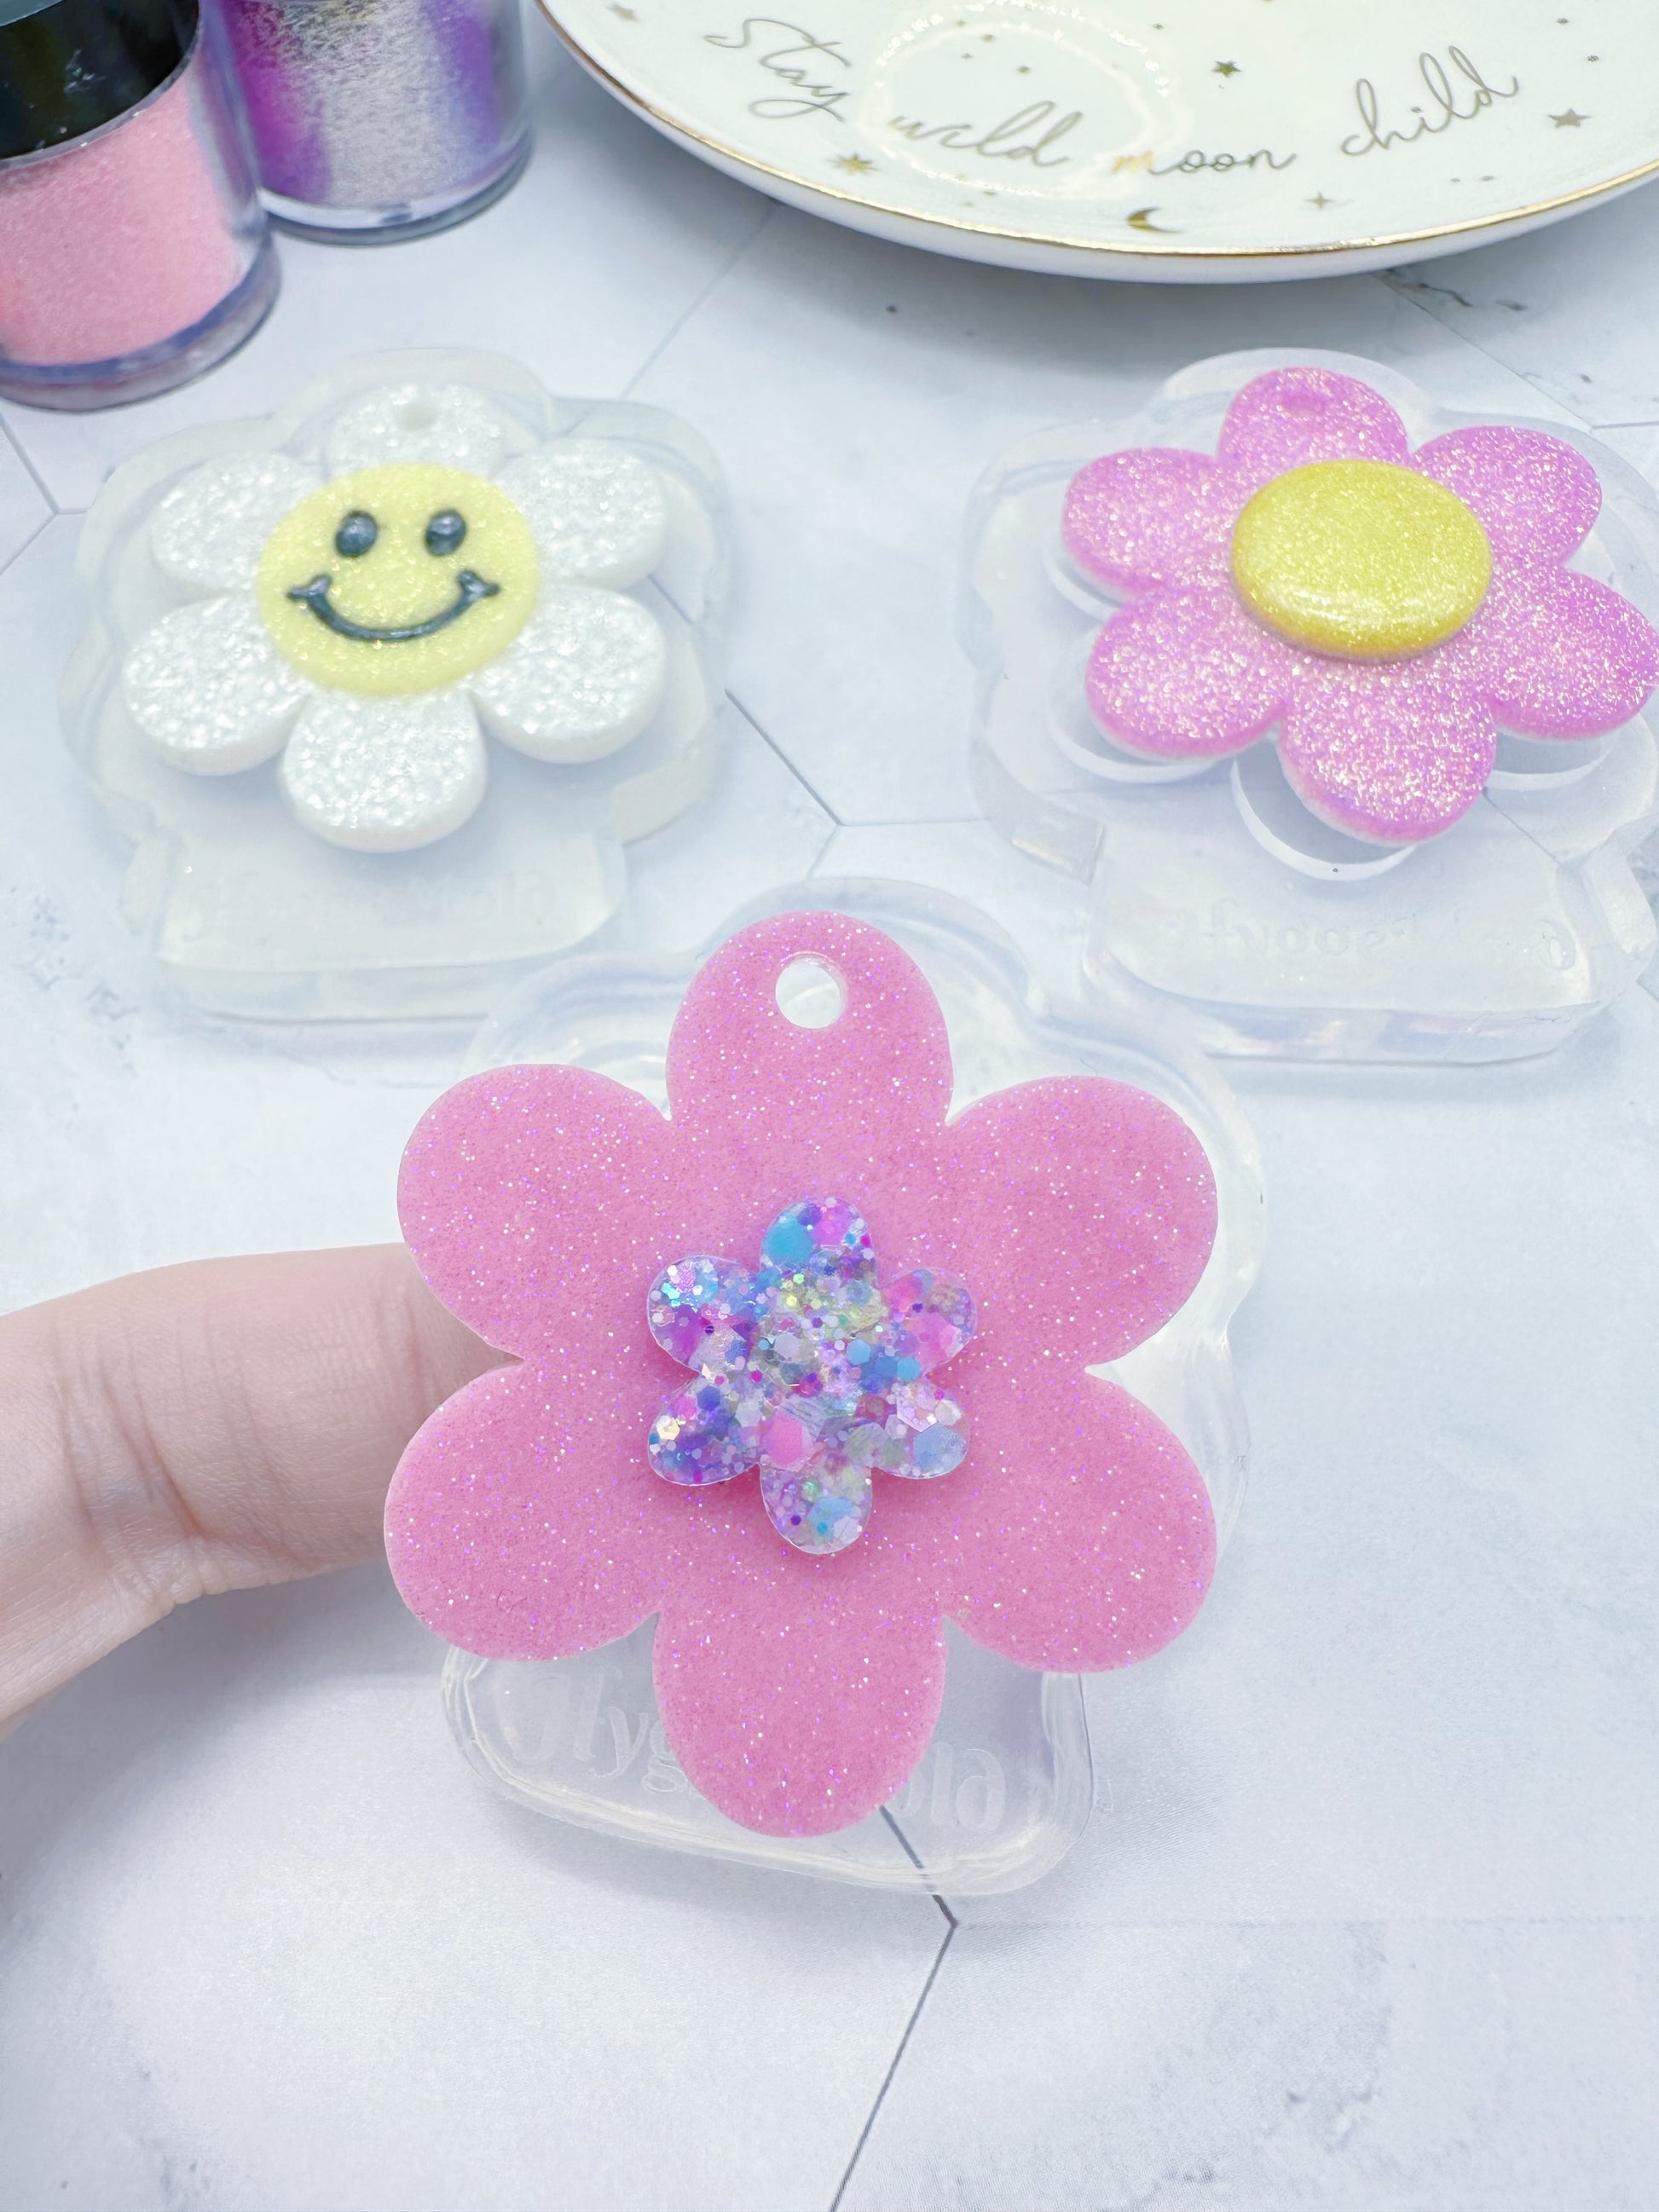 Organic Shape Flower Keychain Silicone Mold for Resin